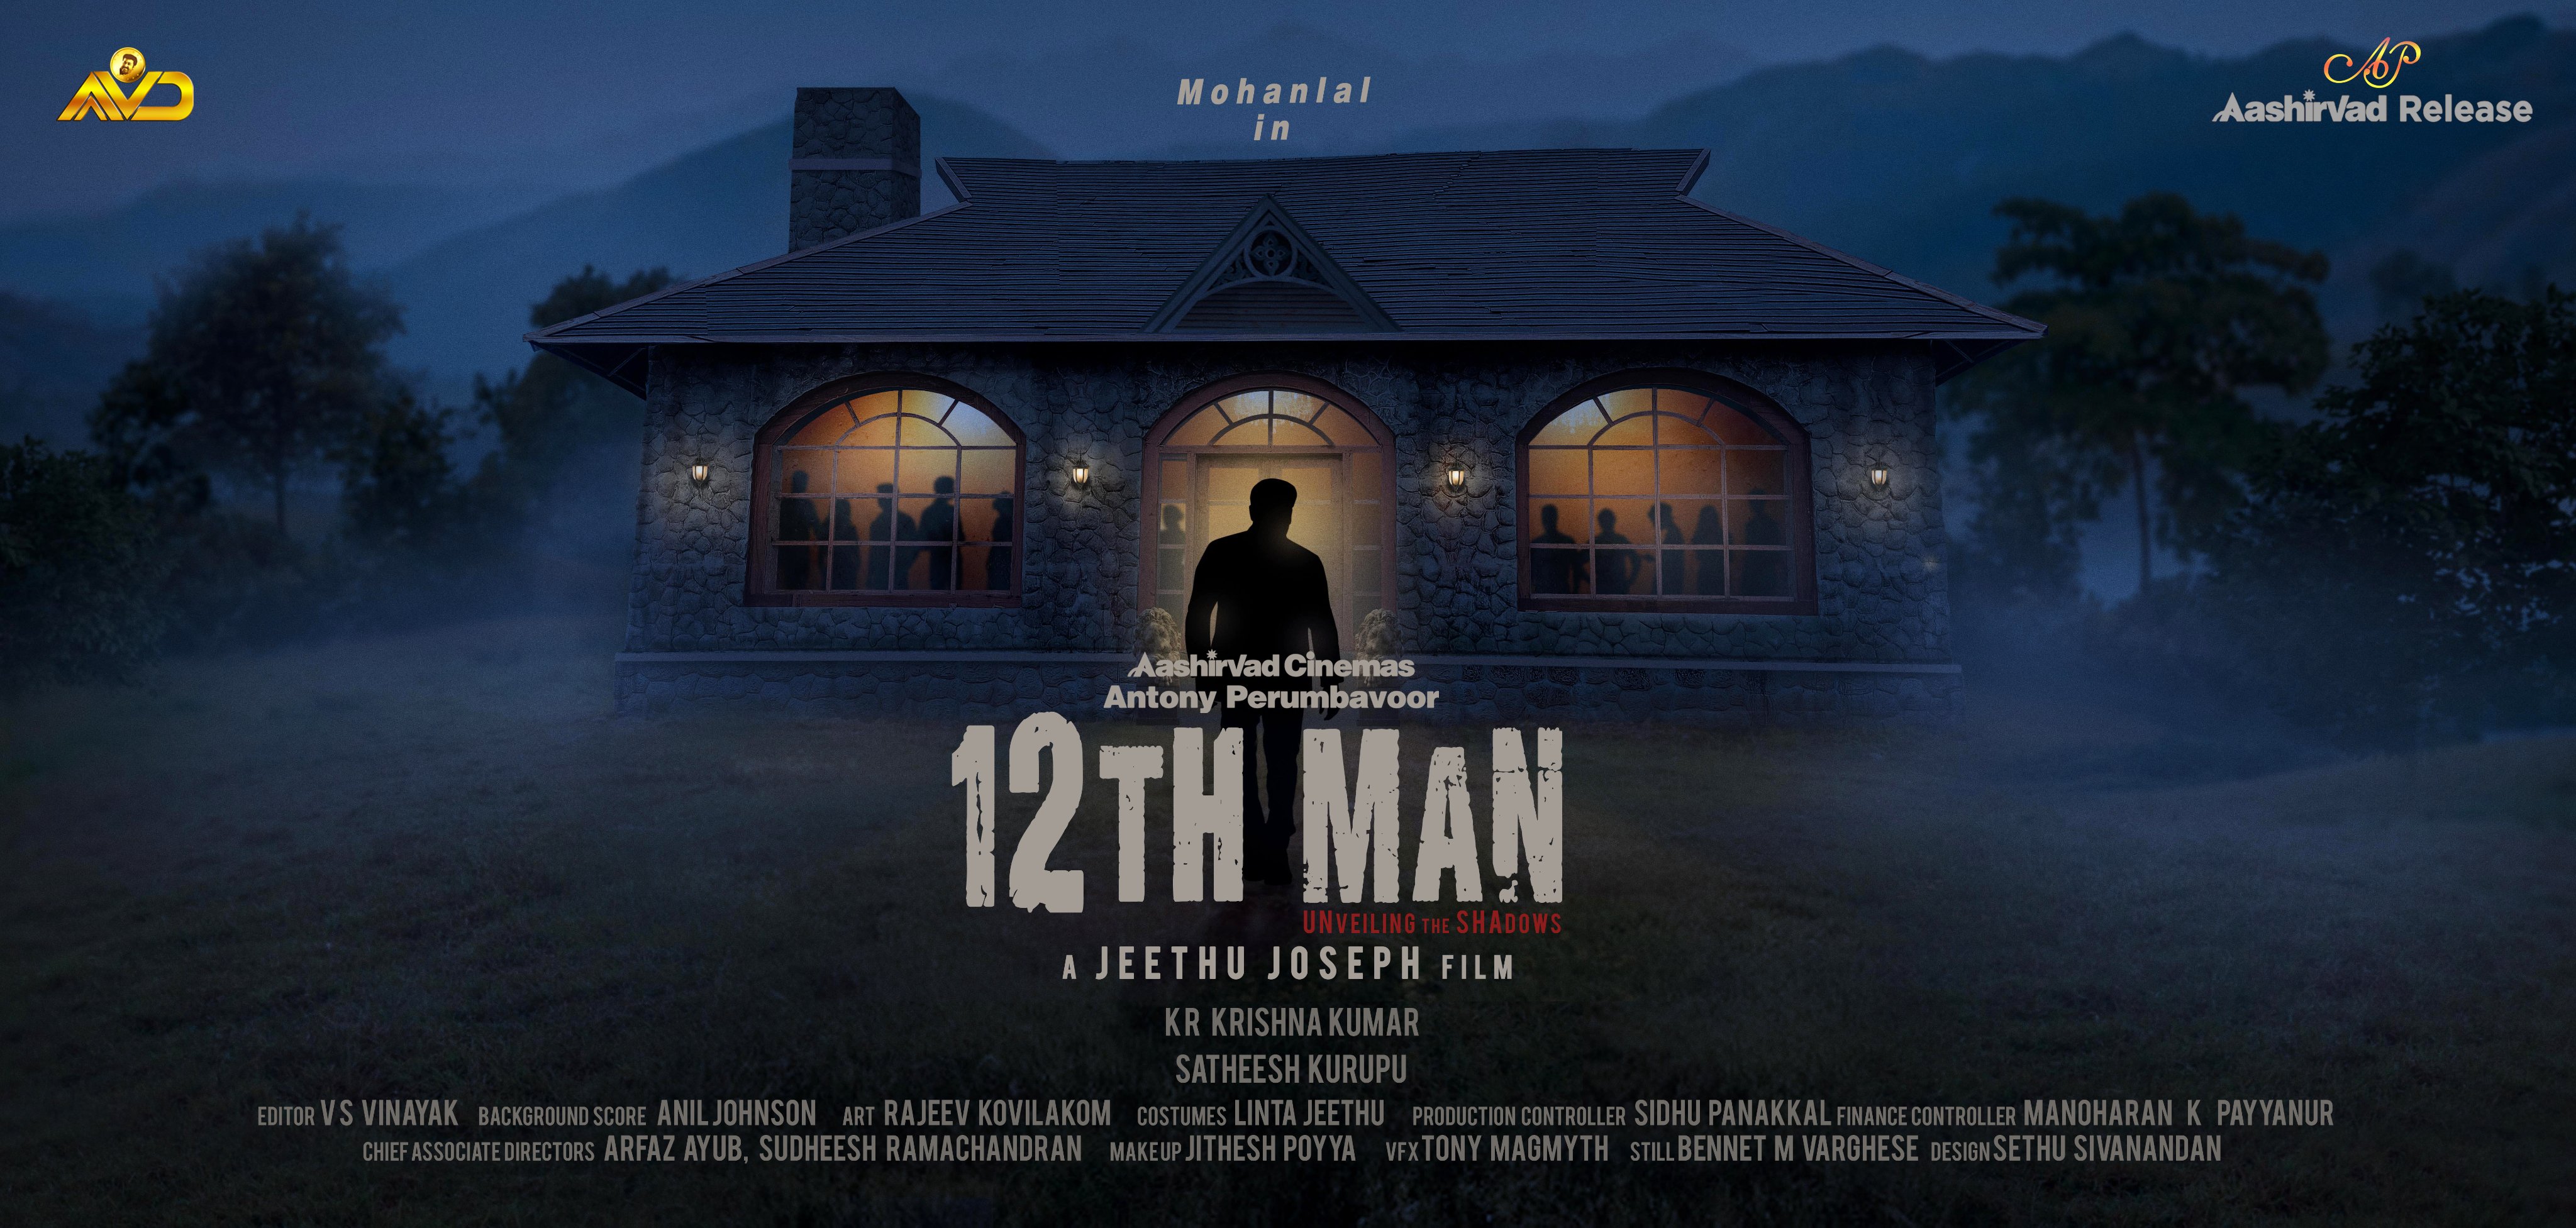 Mirattal update from this blockbuster hero director's upcoming mystery thriller 12th man ft Mohanlal, Jeethu Joseph